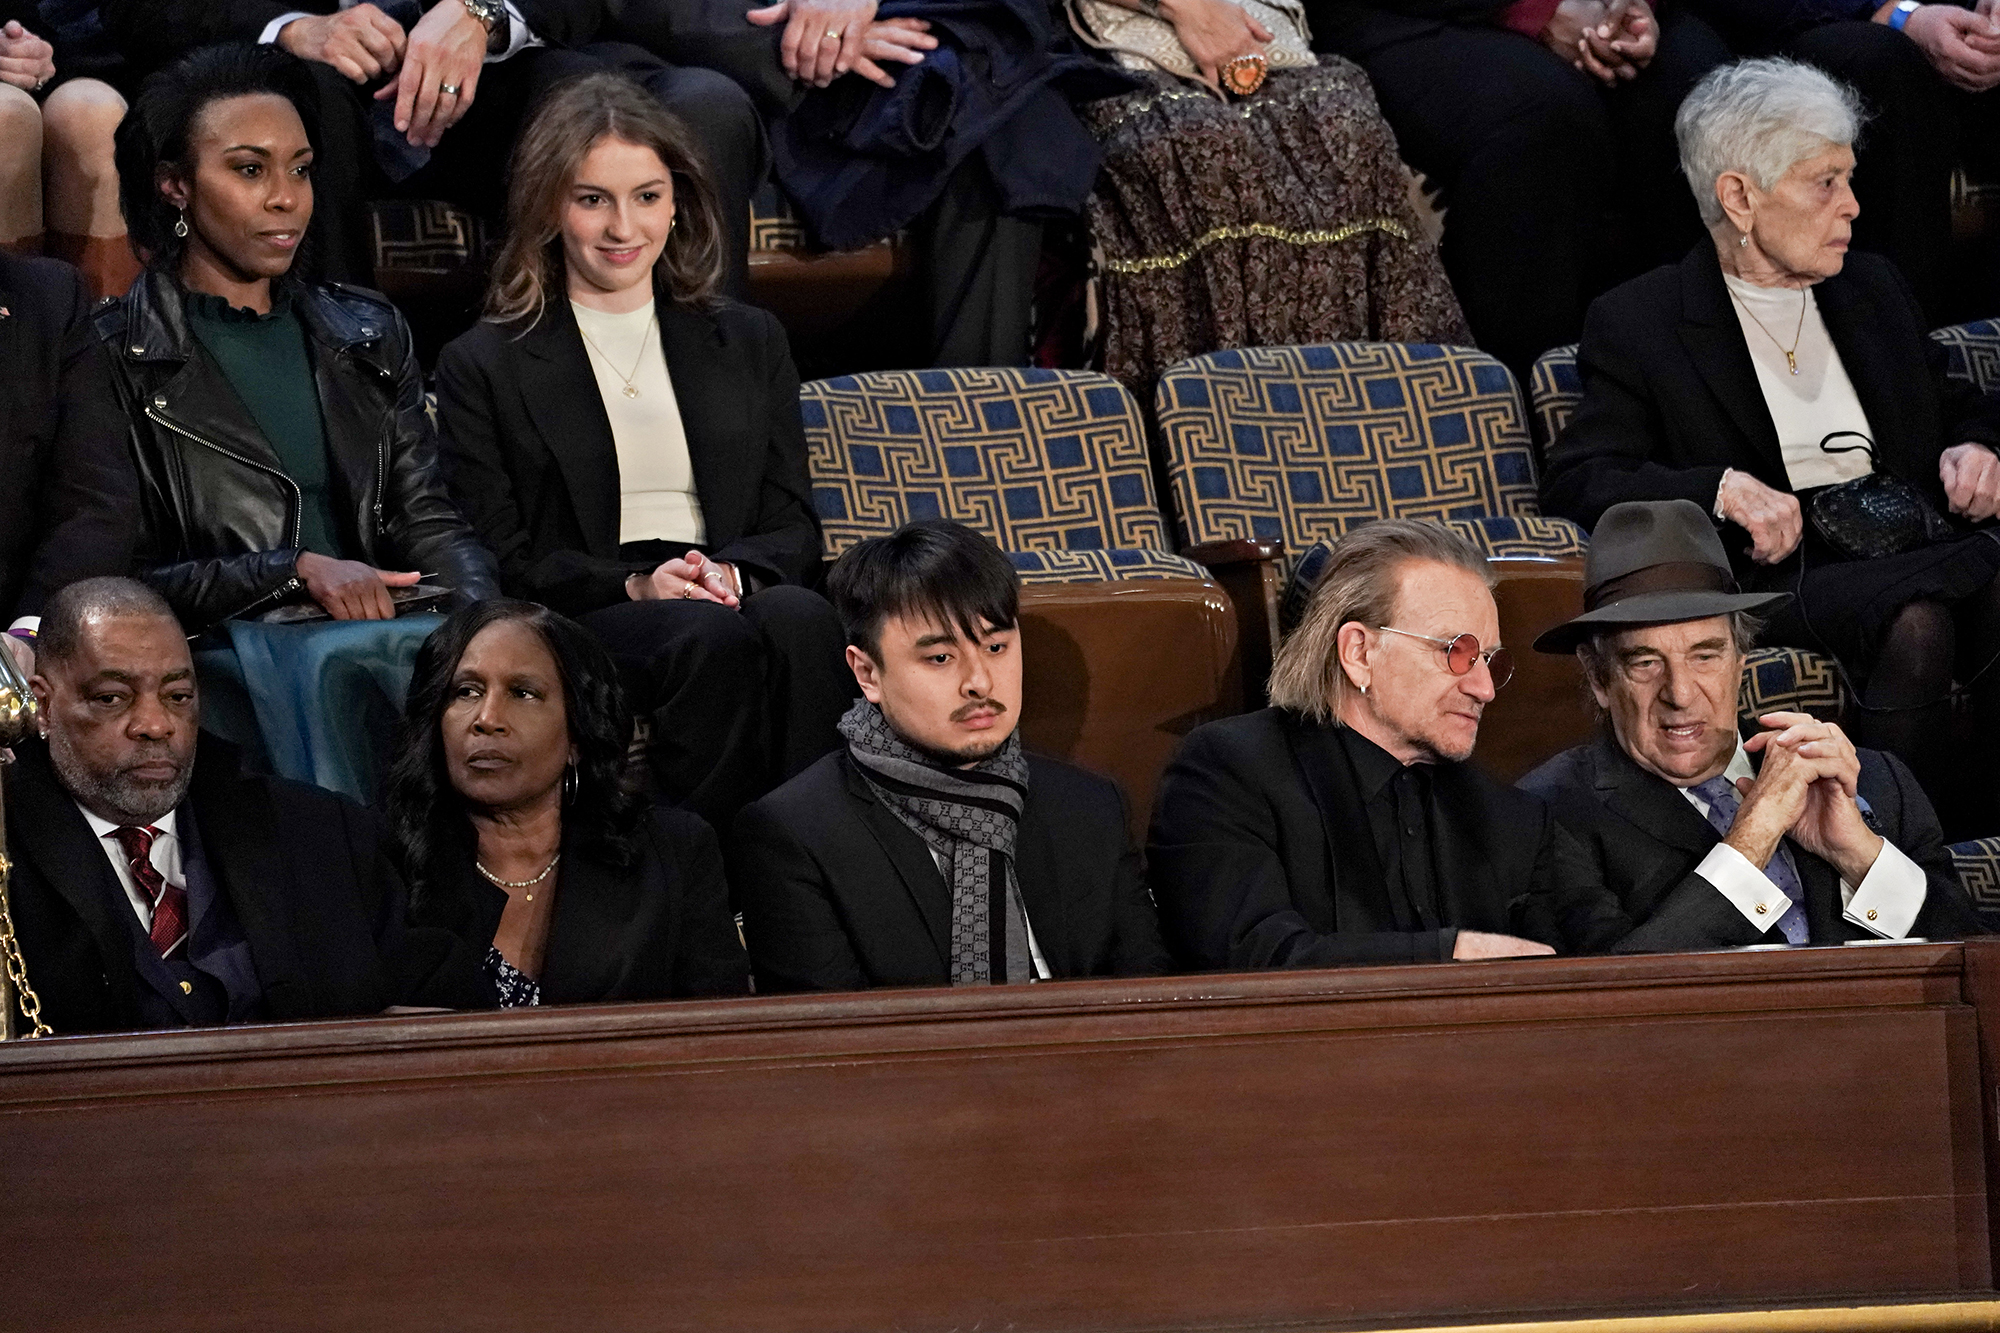 Paul Pelosi, husband of Representative Nancy Pelosi, a Democrat from California, from right, musician Bono, Brandon Tsay, who disarmed the shooter responsible for the mass shooting at the Monterey Park Lunar New Year celebrations, and RowVaughn Wells and Rodney Wells, mother and stepfather of Tyre Nichols, a Black man who was fatally beaten by Memphis, Tennessee, police officers, ahead of a State of the Union address.